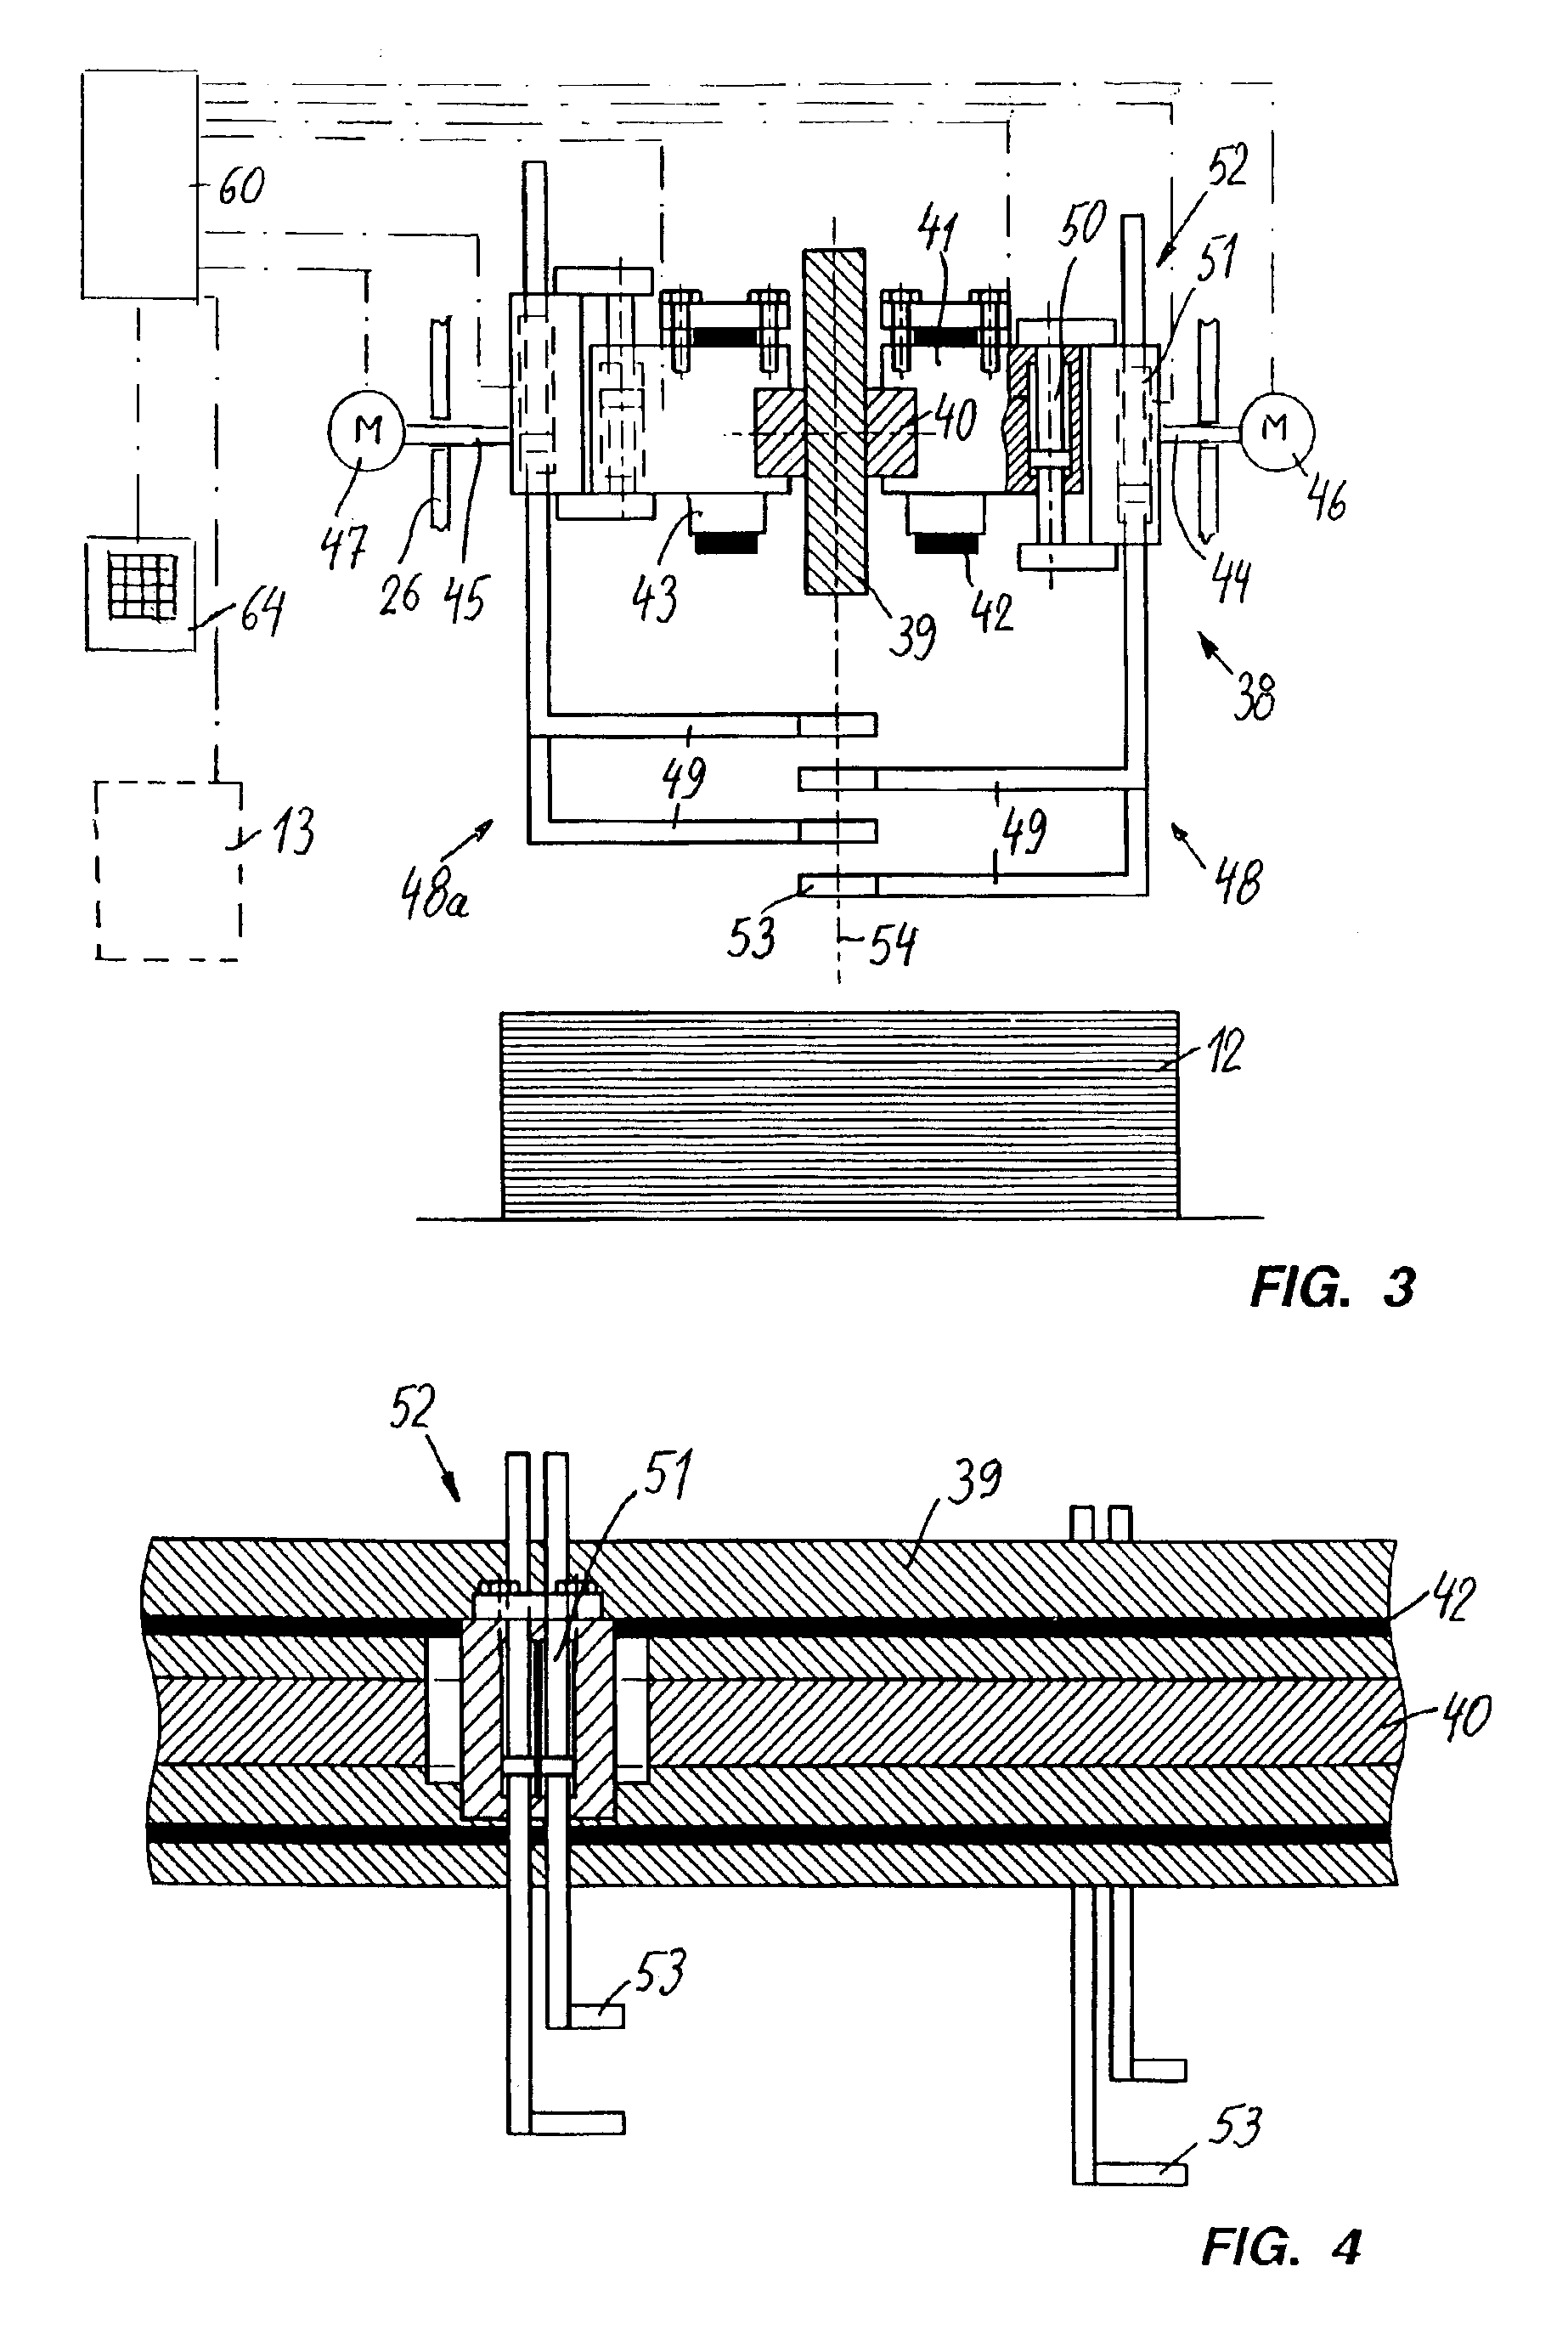 Conveyor system and method for transferring stacks of paper or the like to a discharge conveyor